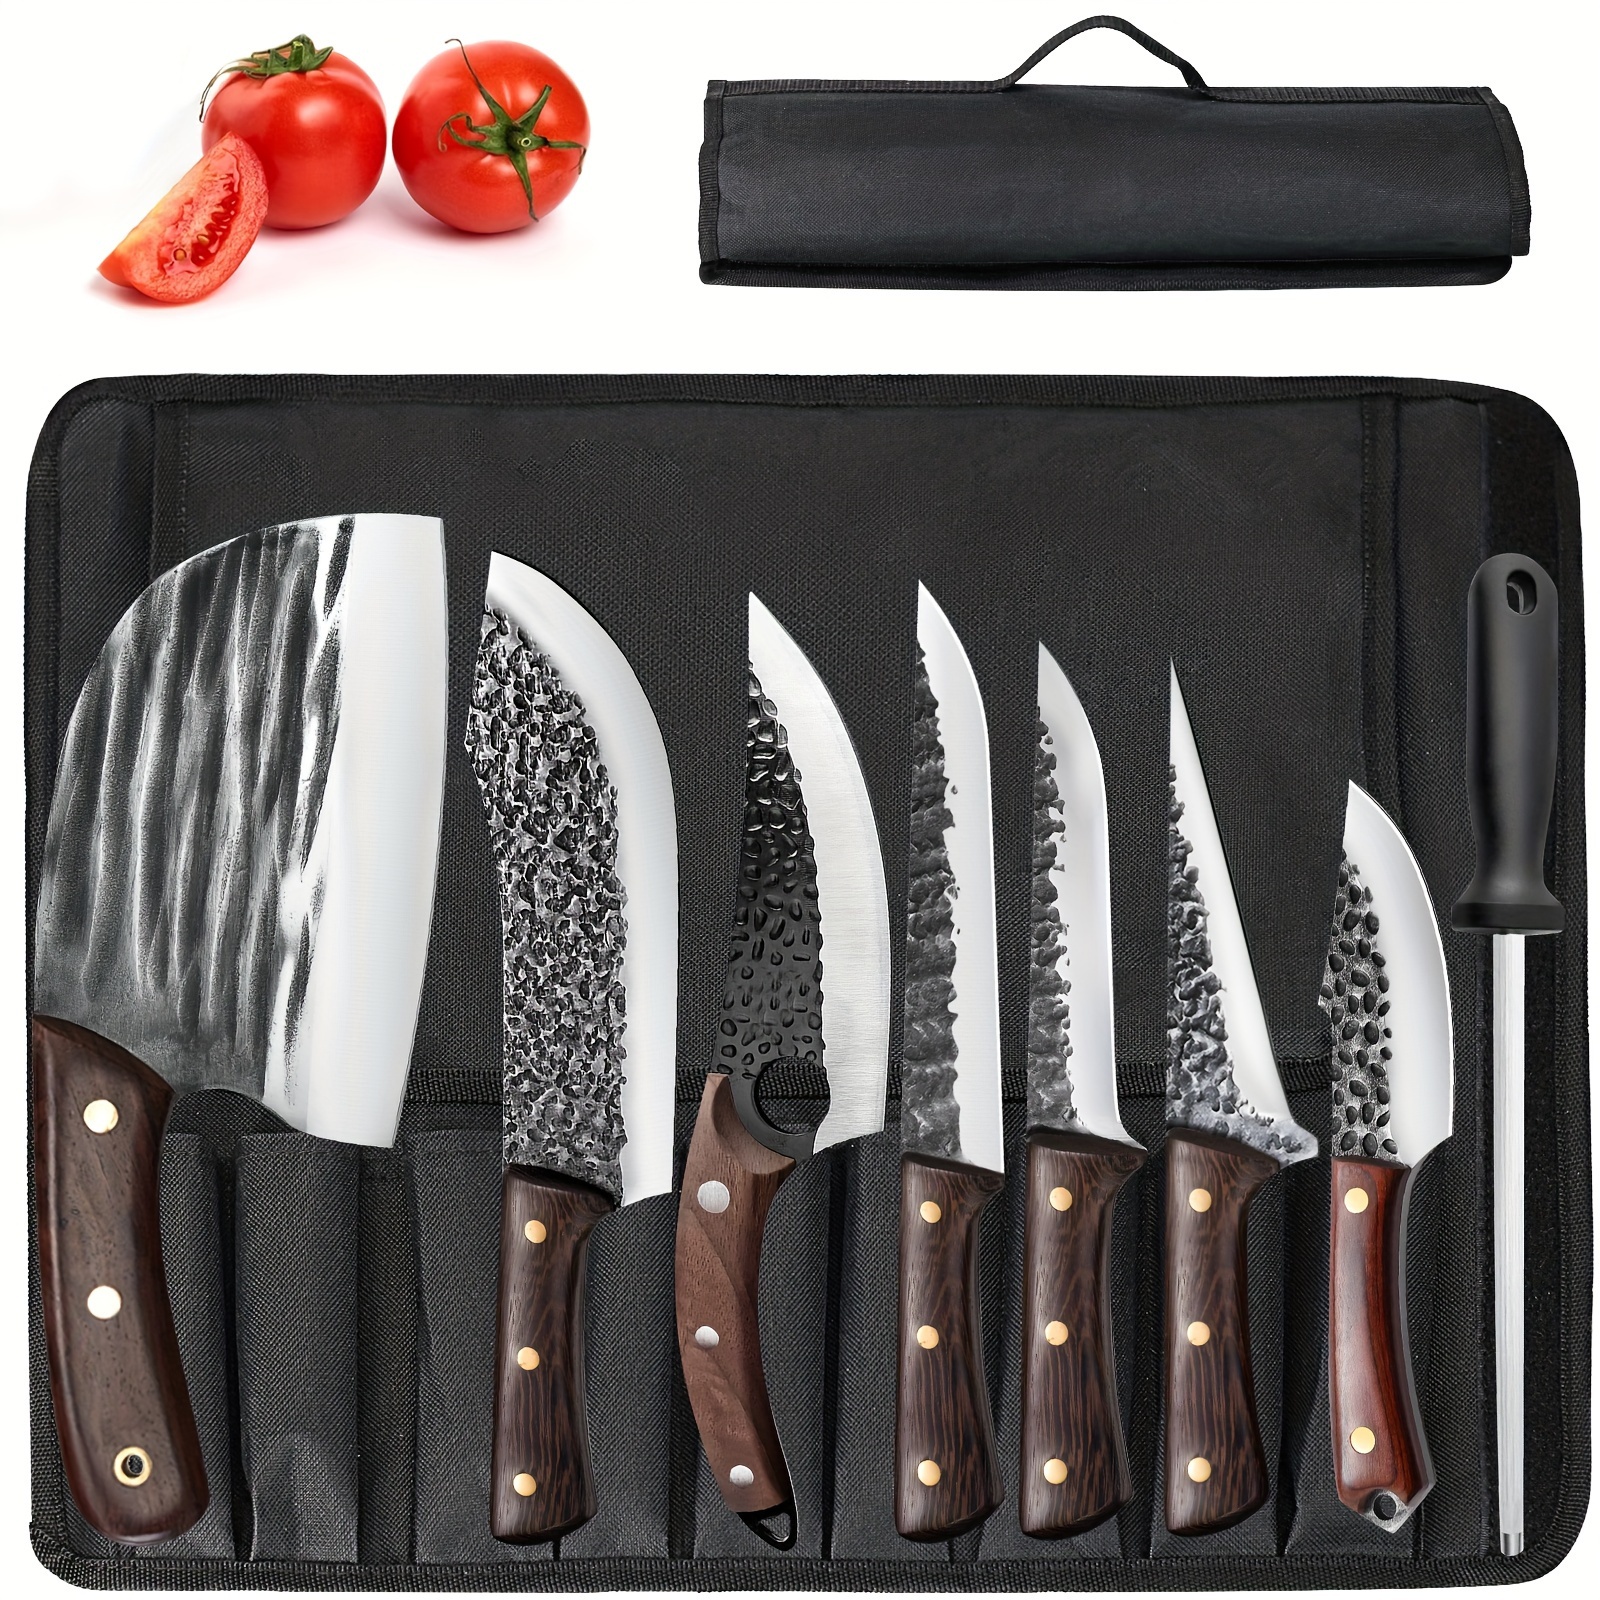 

8 Pieces Butcher Knife Set With Roll Bag, Butcher Knife For Meat Cutting, Professional Meat Knife Set, High Carbon Stainless Steel Kitchen Chef Knife Set